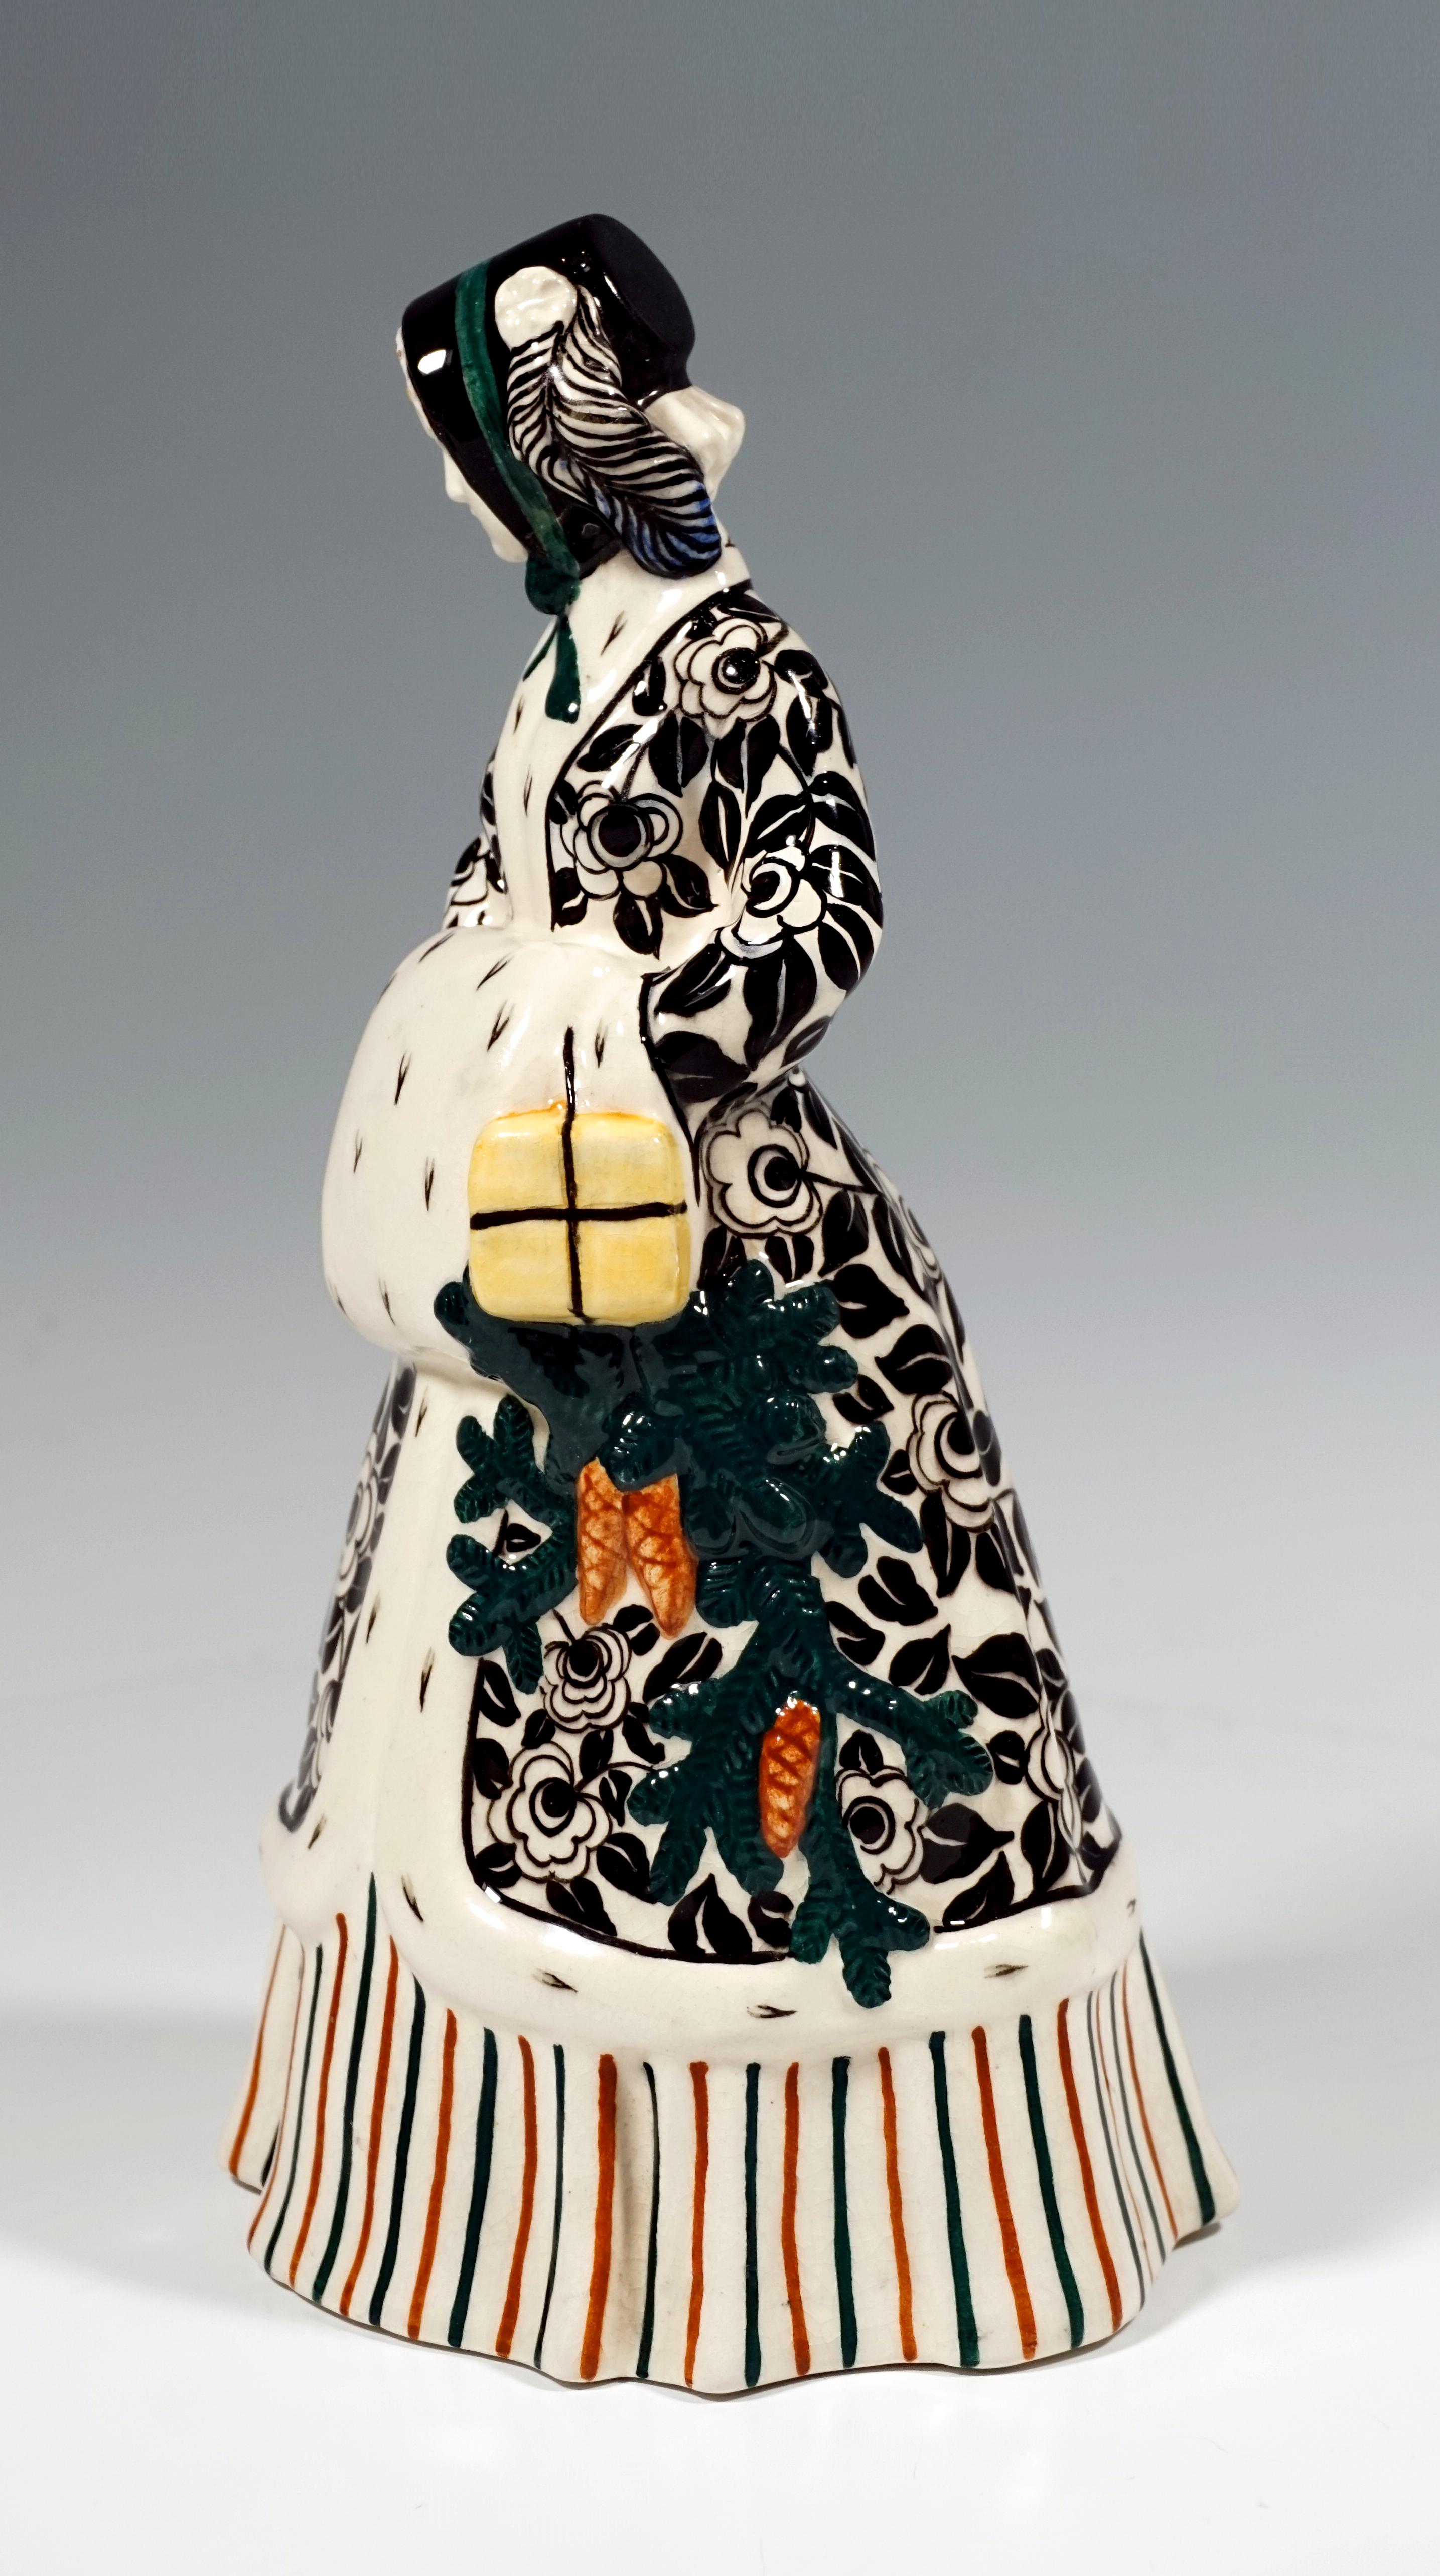 Pedestal-less crinoline figure with floor-length, three-colored, longitudinally striped skirt, over it a coat decorated with an elaborate floral pattern and trimmed with ermine, warming her hands in an ermine muff held in front of her at hip height.